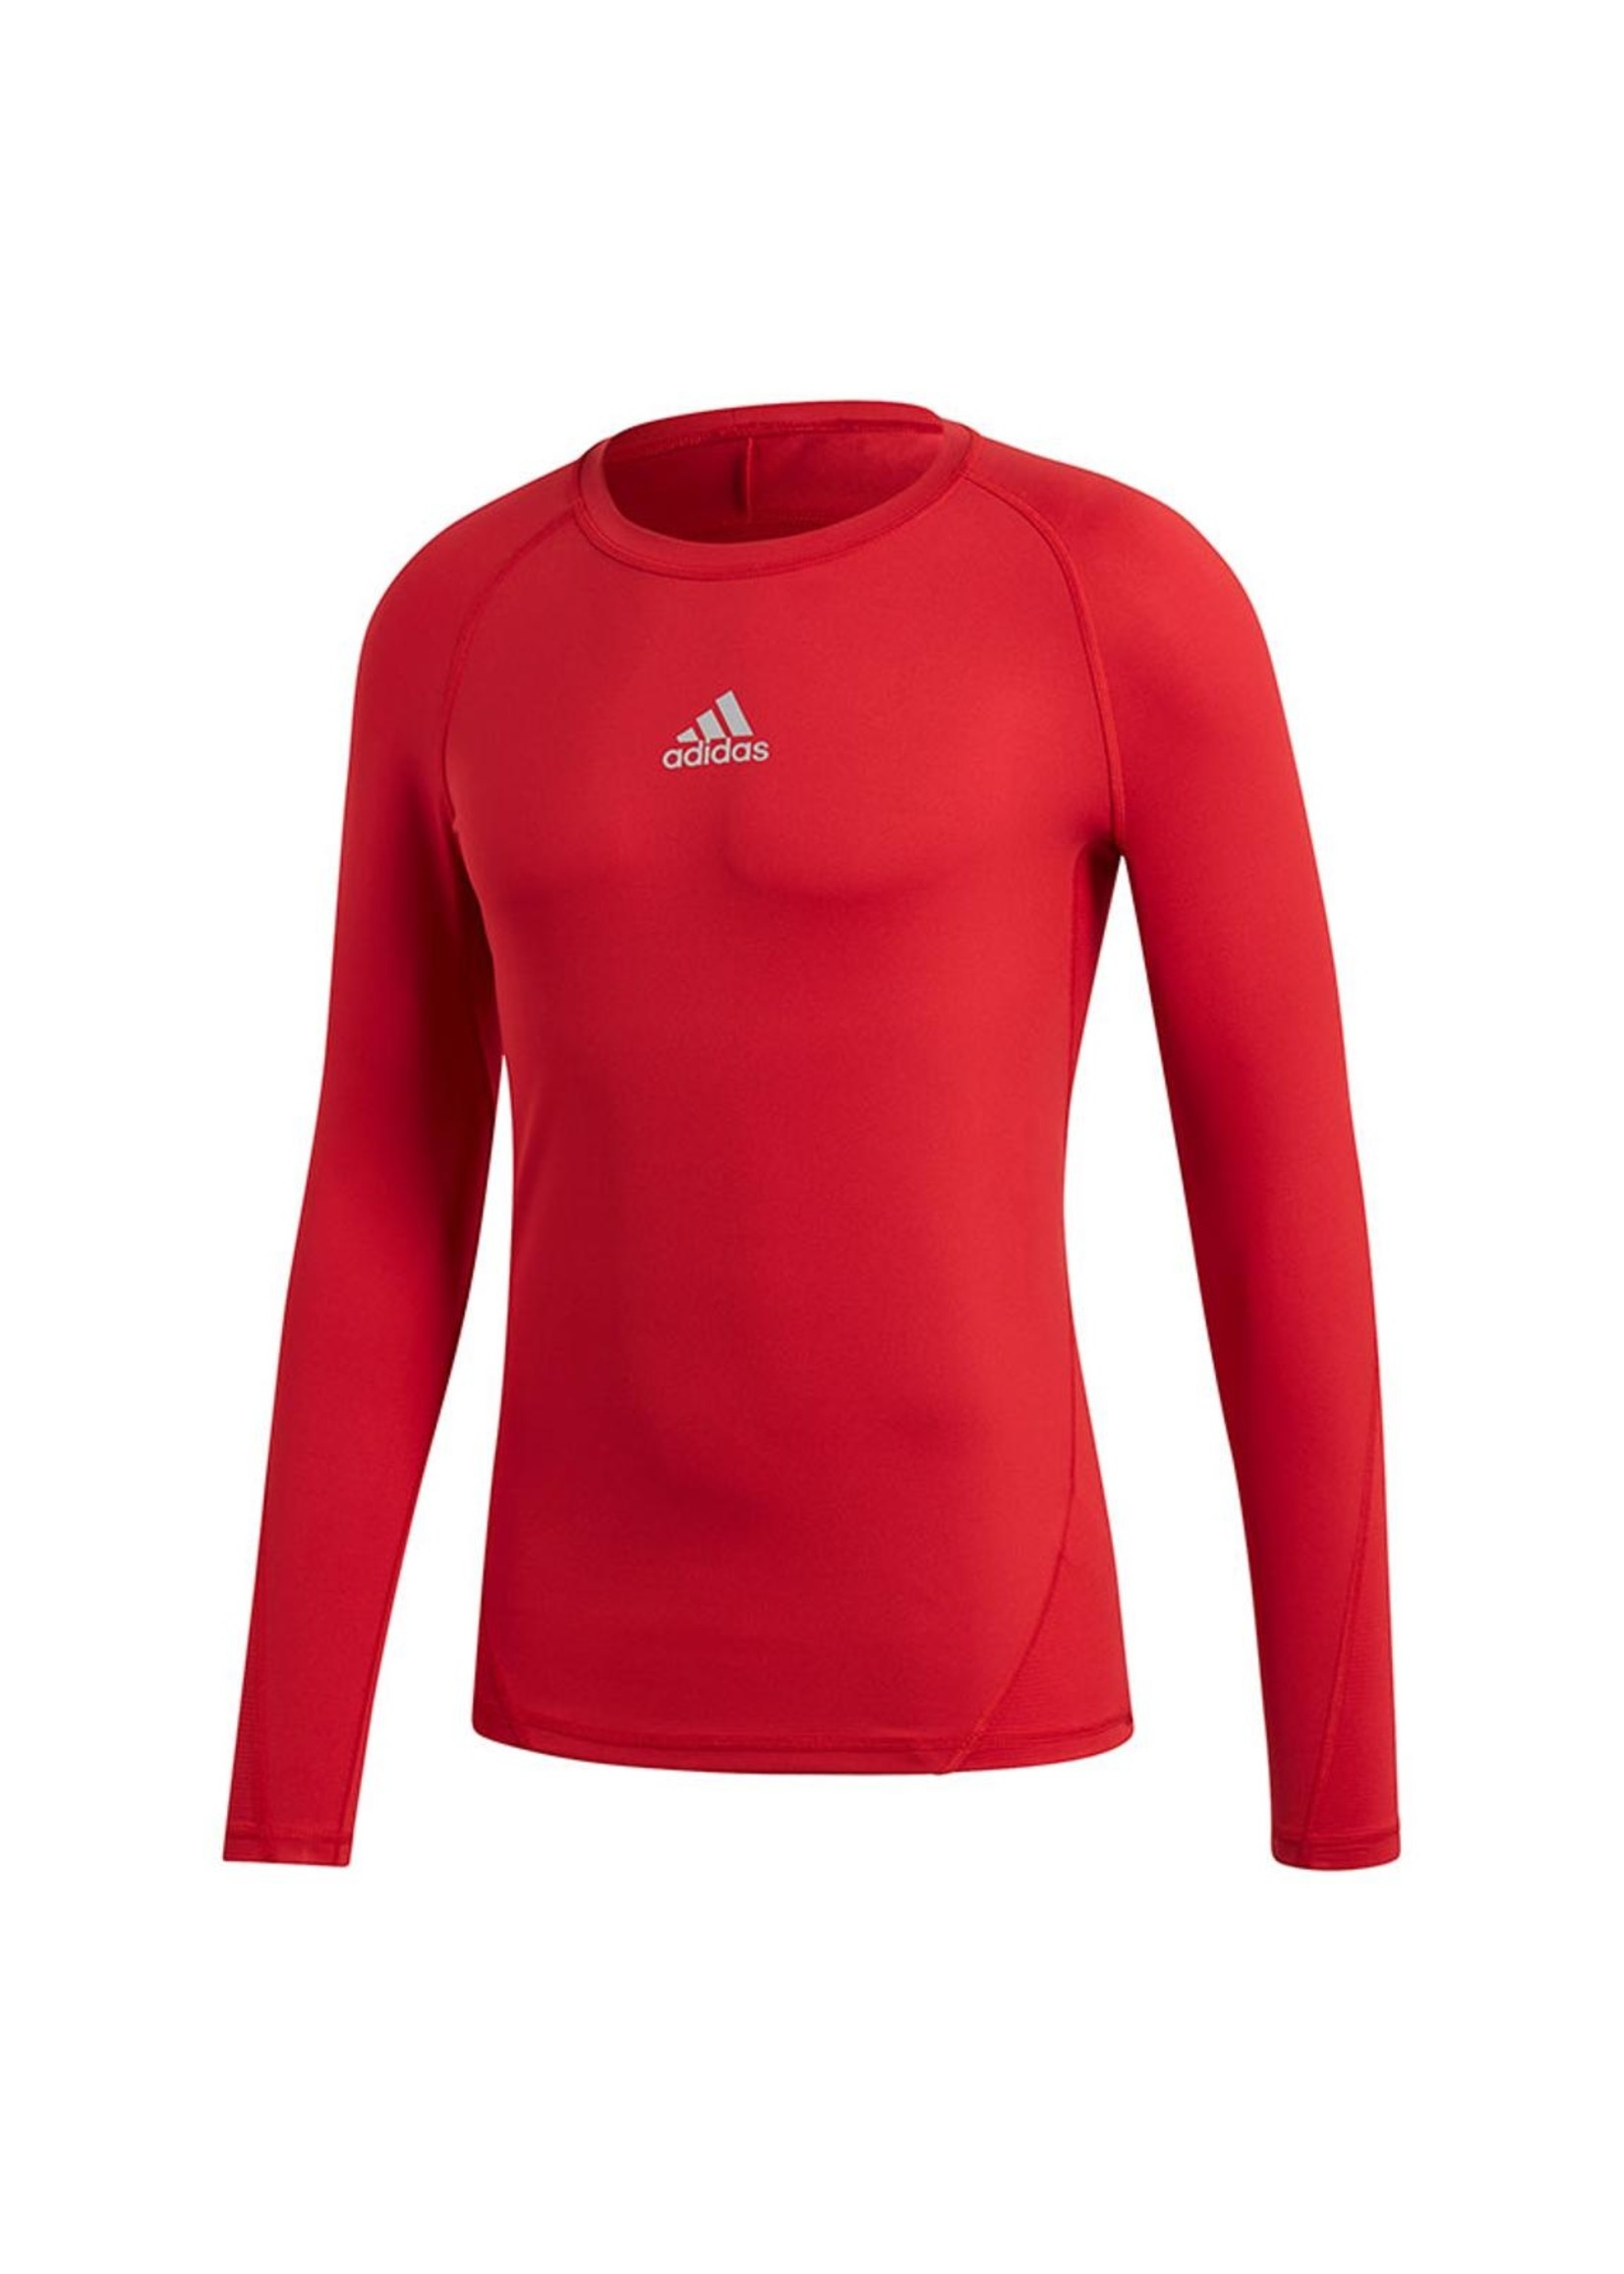 Adidas Compression Red Long Sleeve Adult